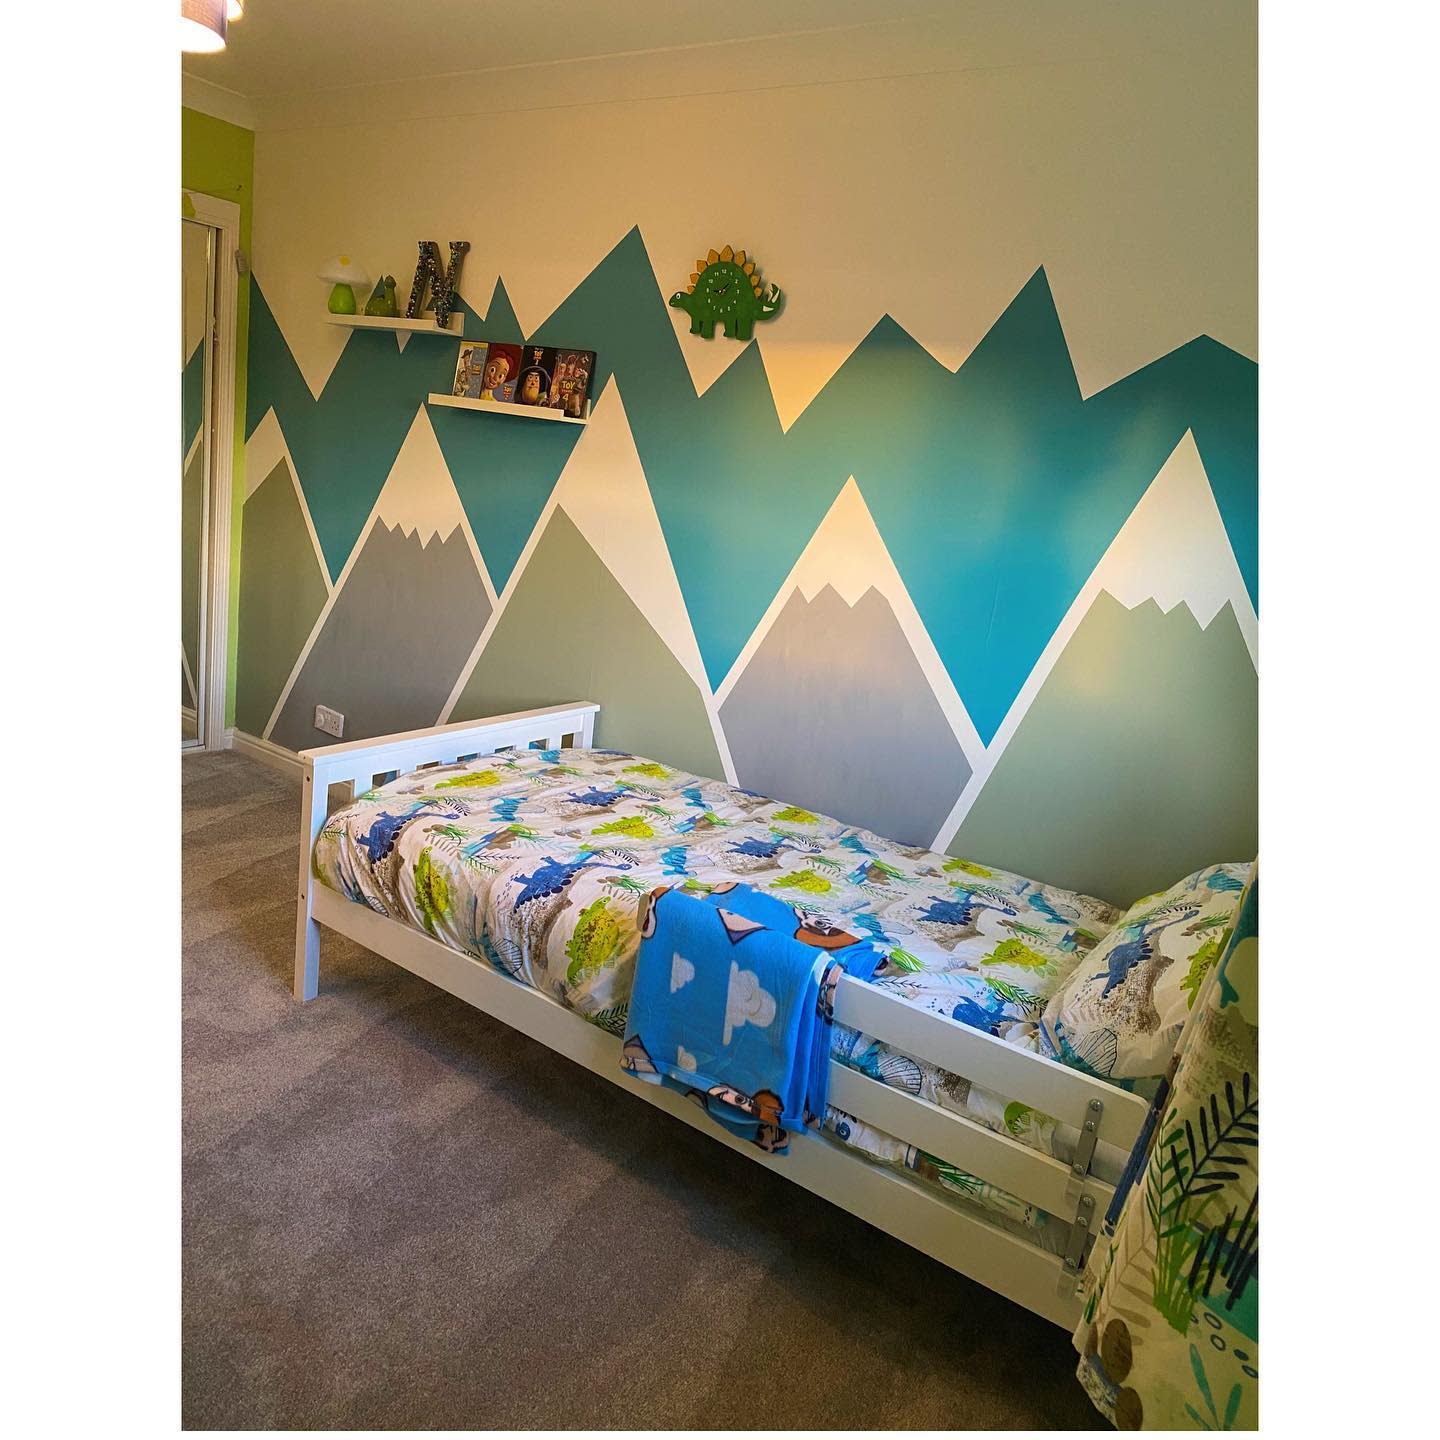 playful mountain design painted on kids bedroom wall